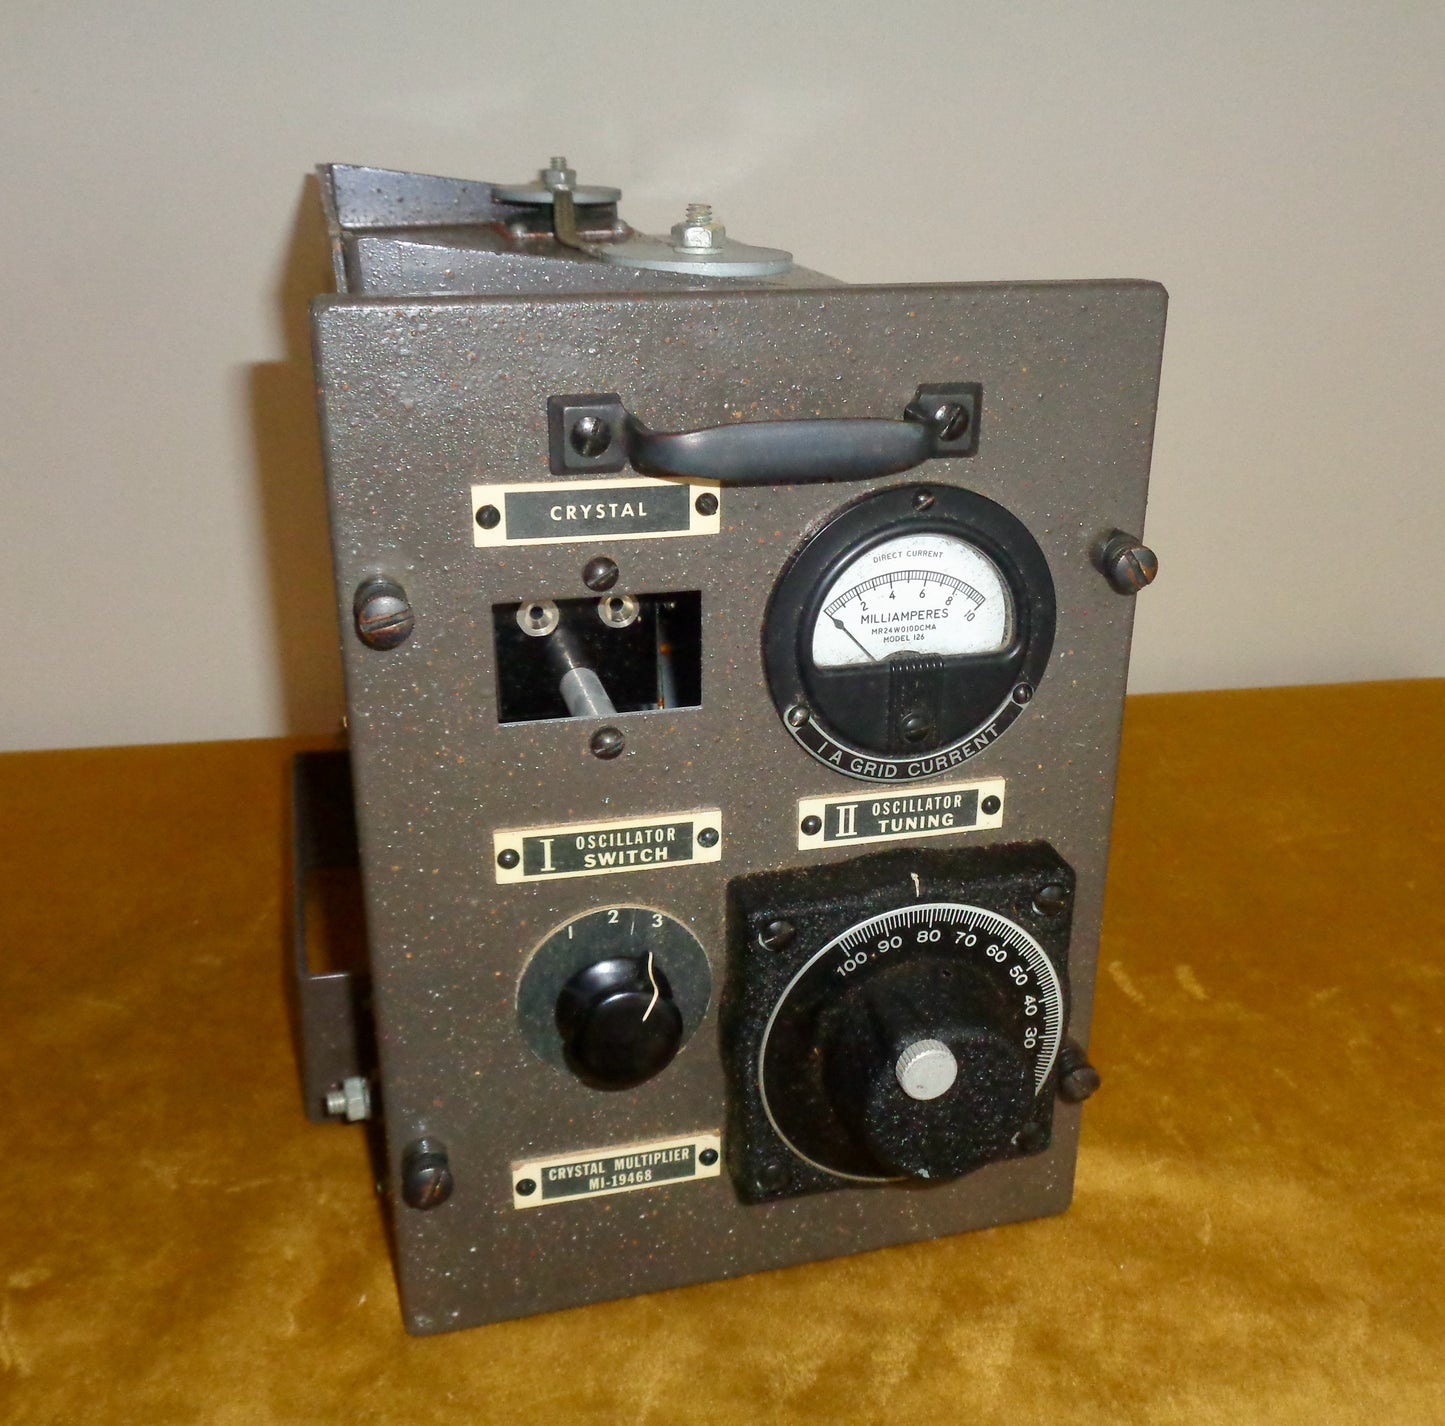 WW2 US Army Signal Corps Crystal Multiplier MI 19468 For An ET4336 Transmitter. New Old Stock In Its Original Box